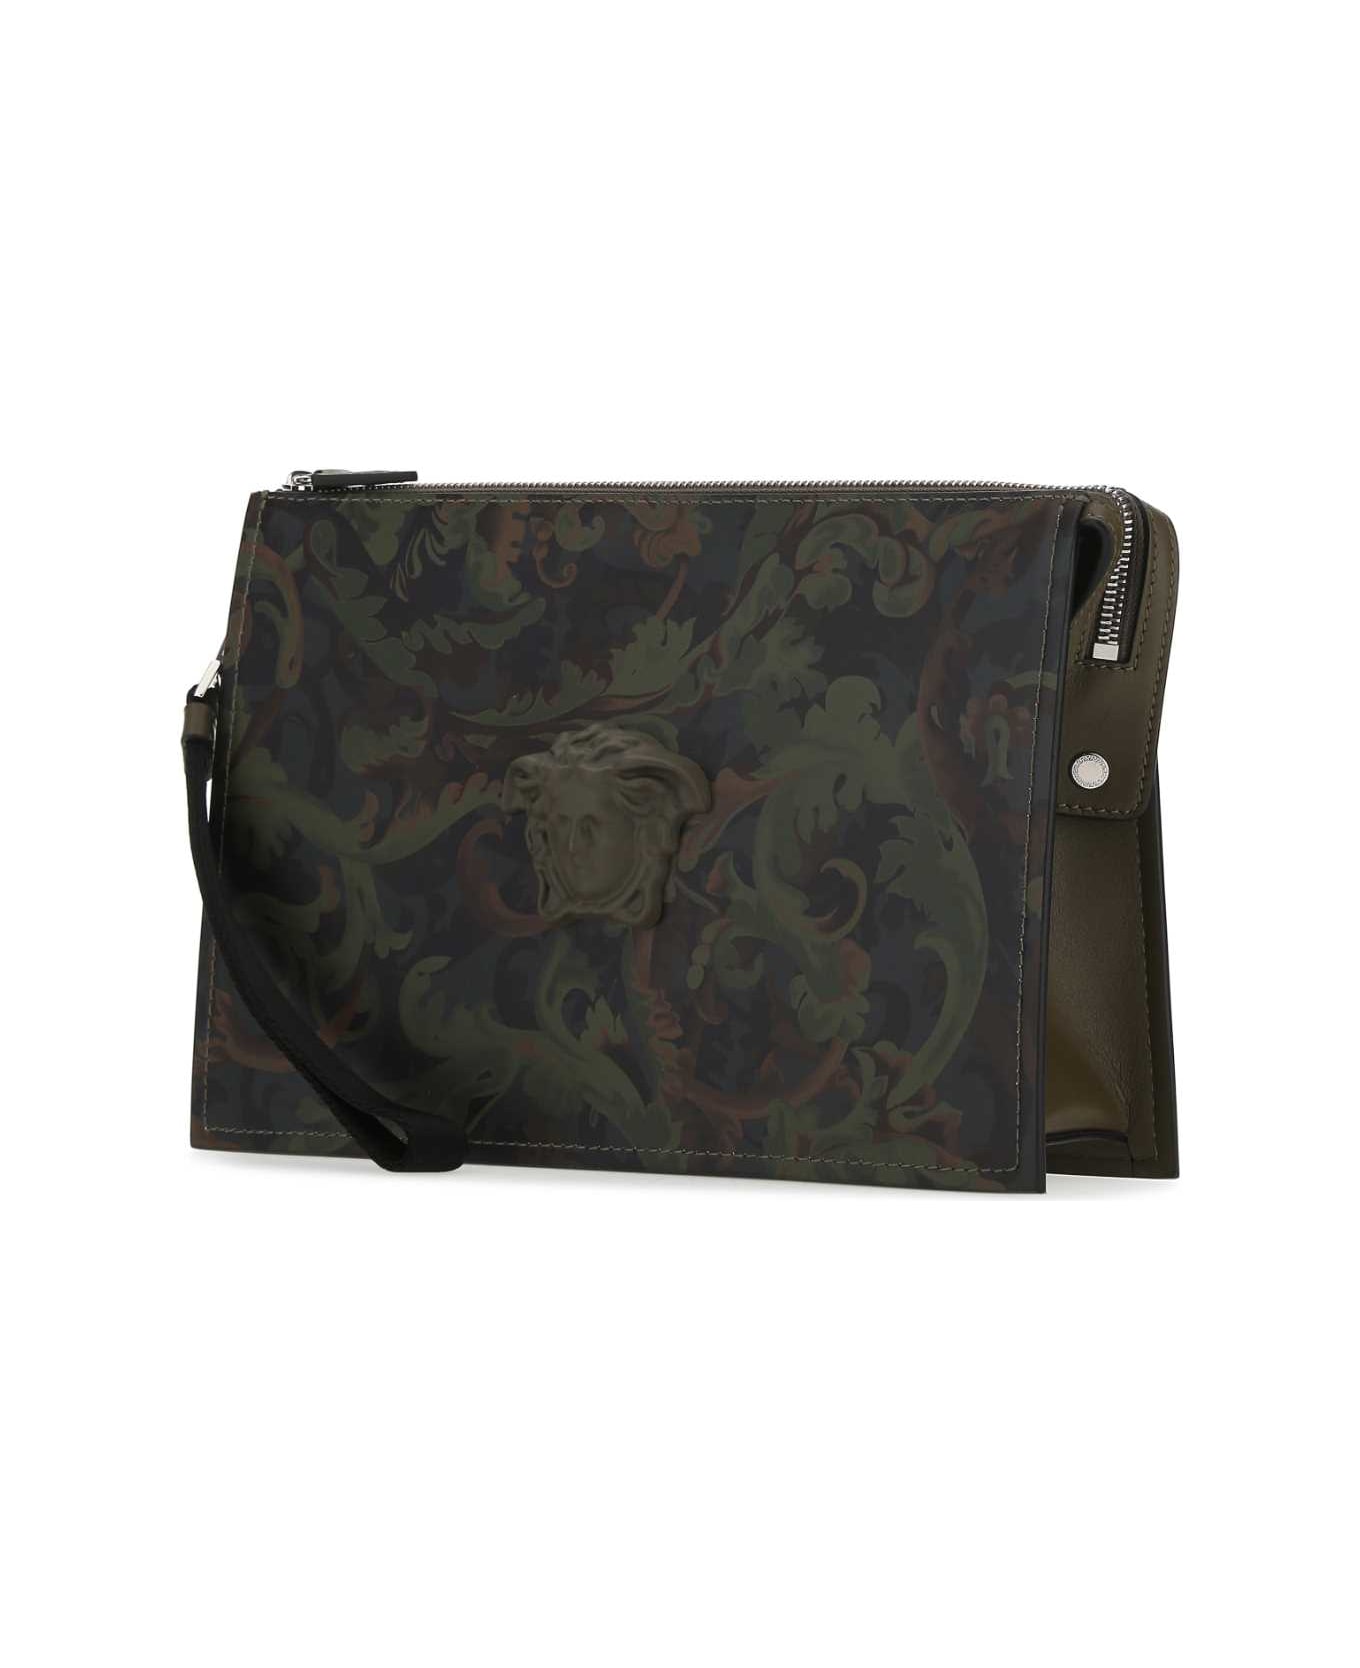 Versace Printed Leather Clutch - 5K00P バッグ